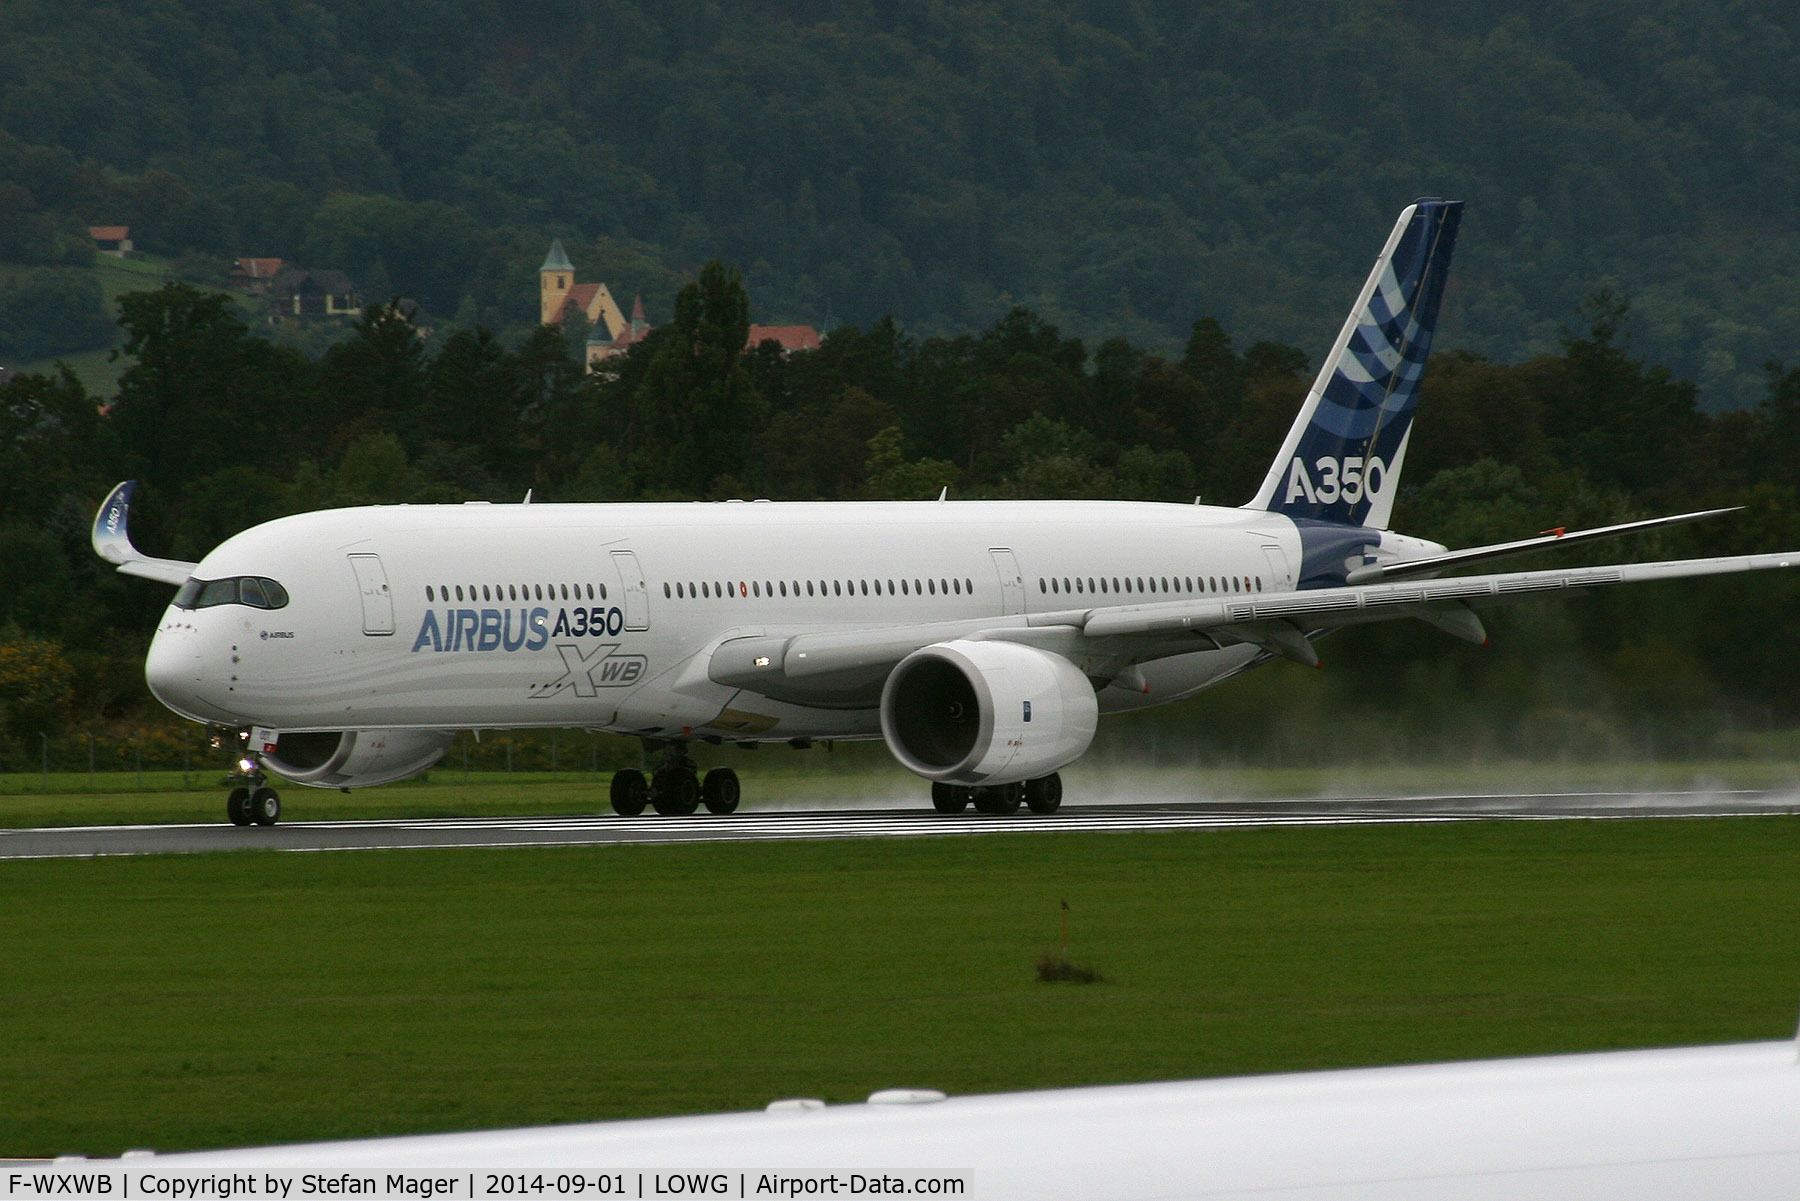 F-WXWB, 2013 Airbus A350-941 C/N 001, First visit of A350-900 @ GRZ